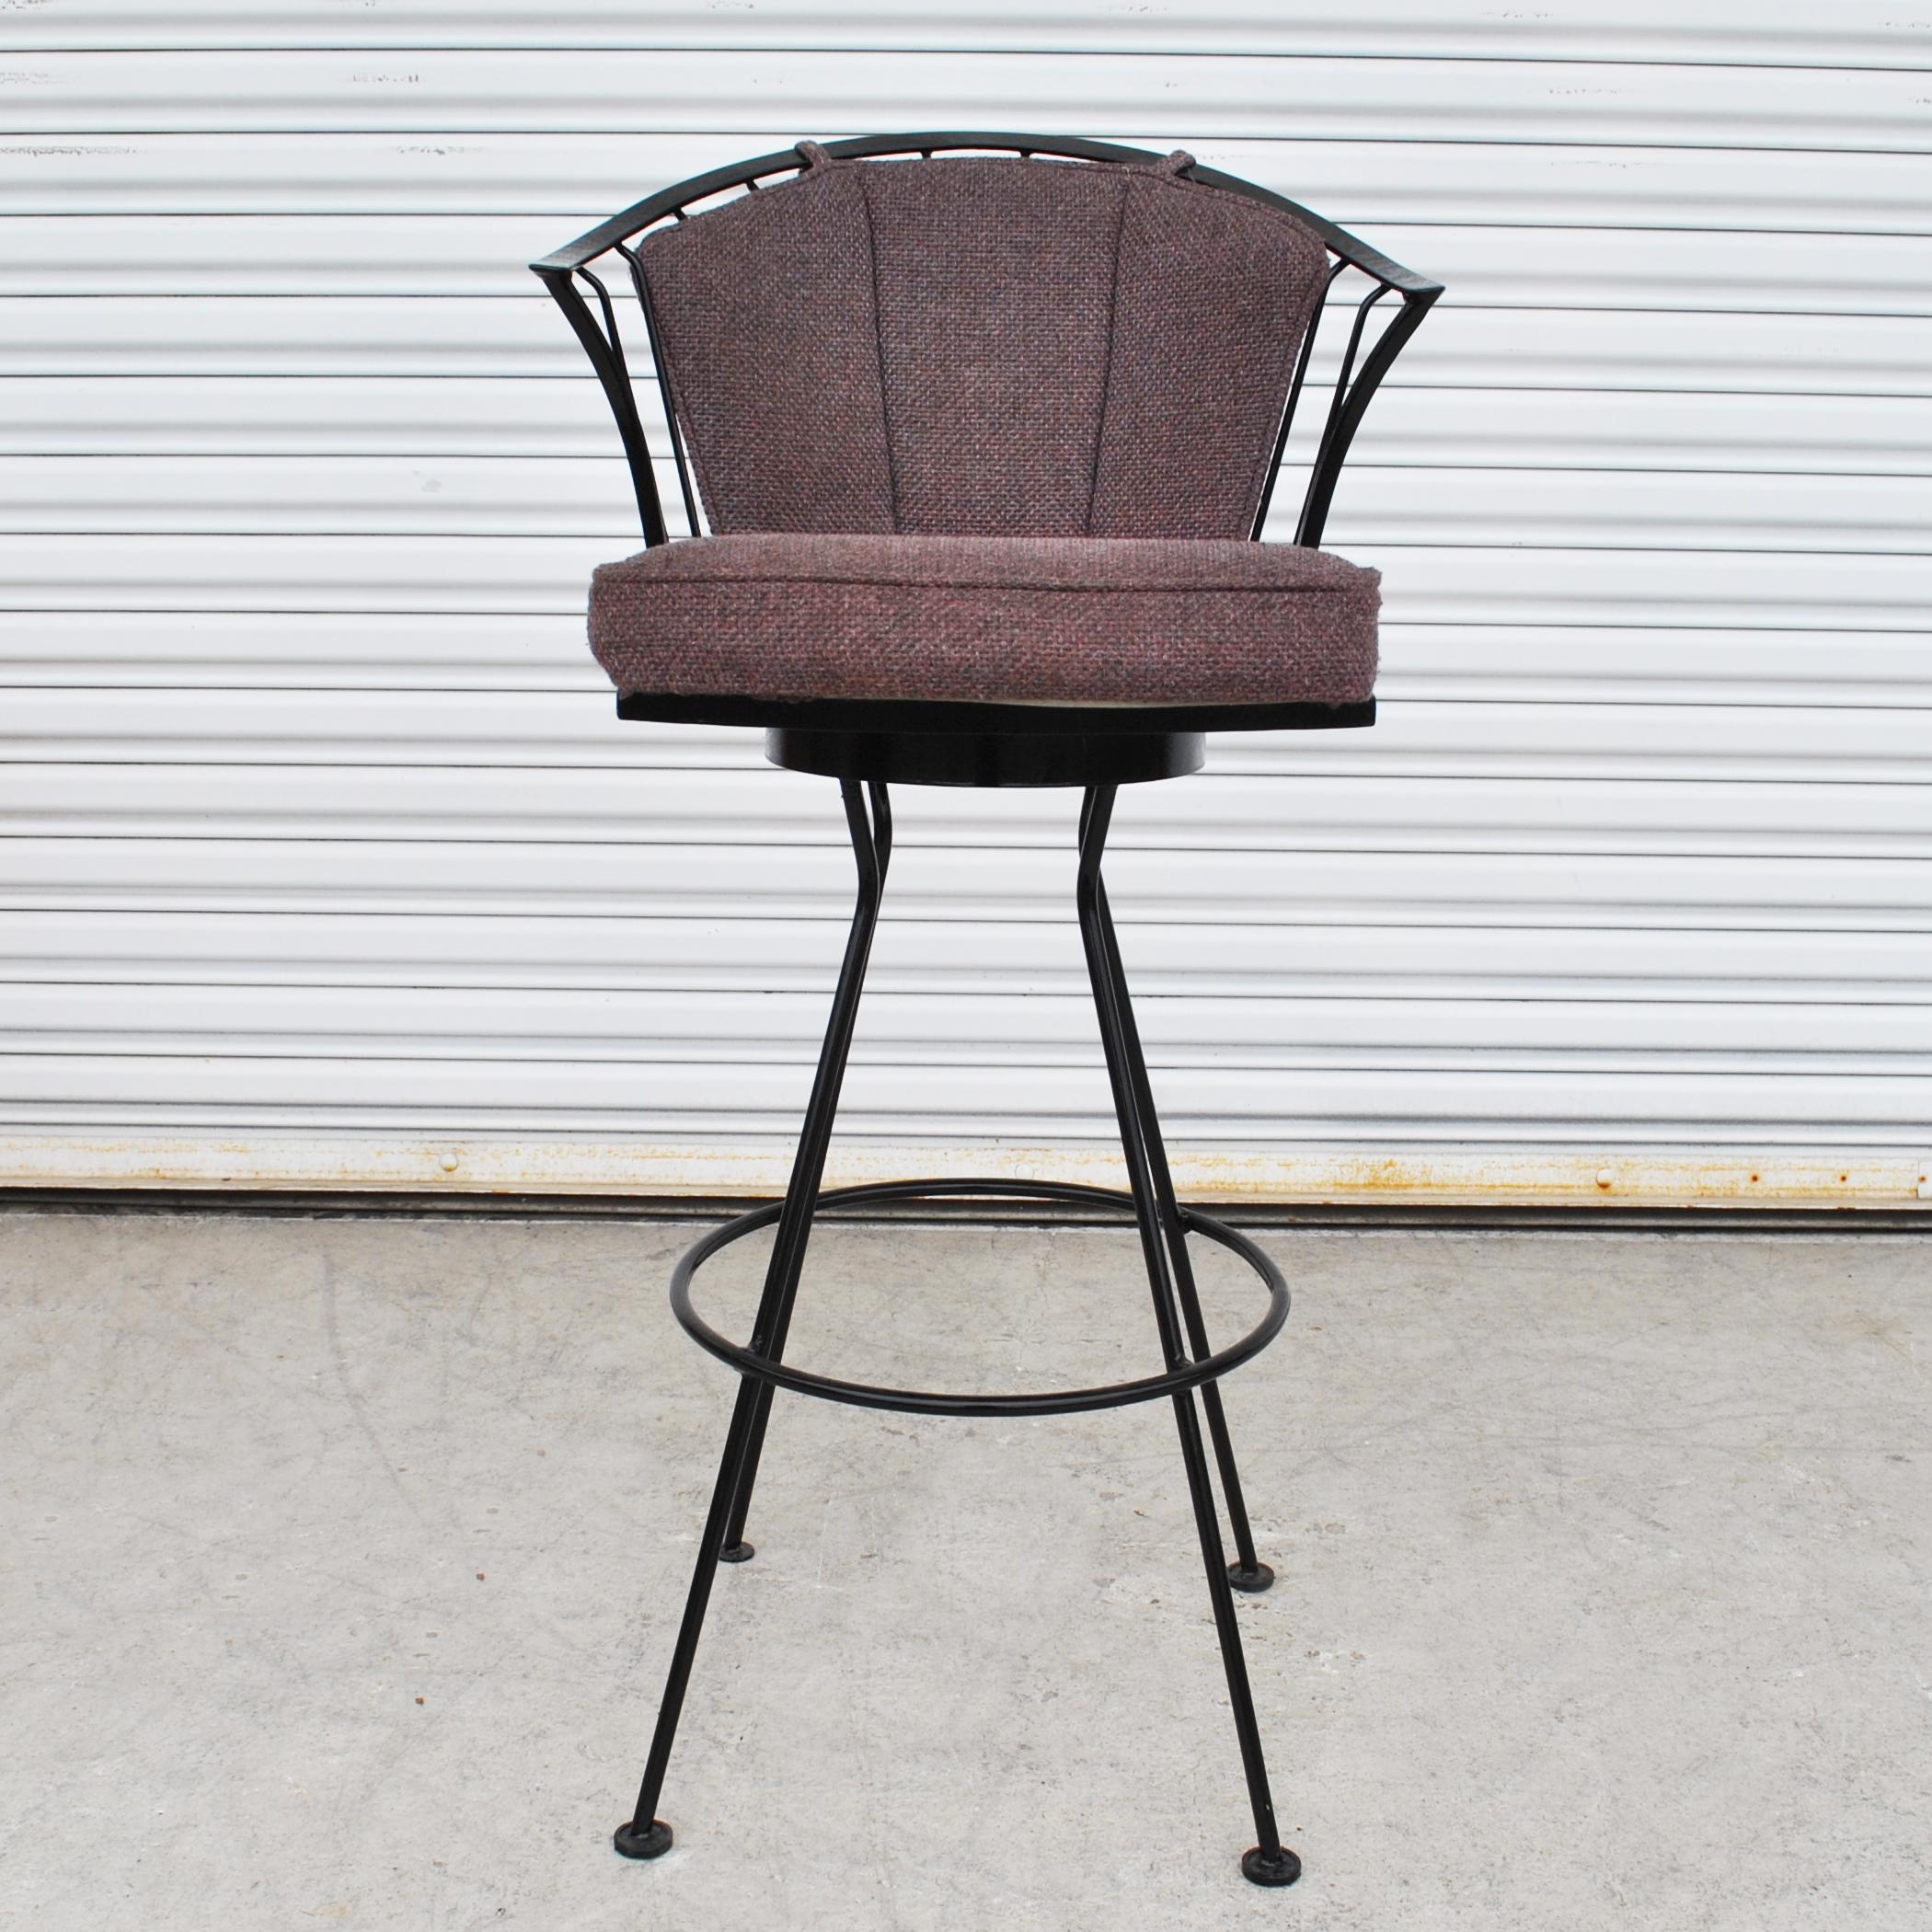 A pair of mid century modern stools made by Woodard.  Black wrought iron frames with burgundy cushions.
32